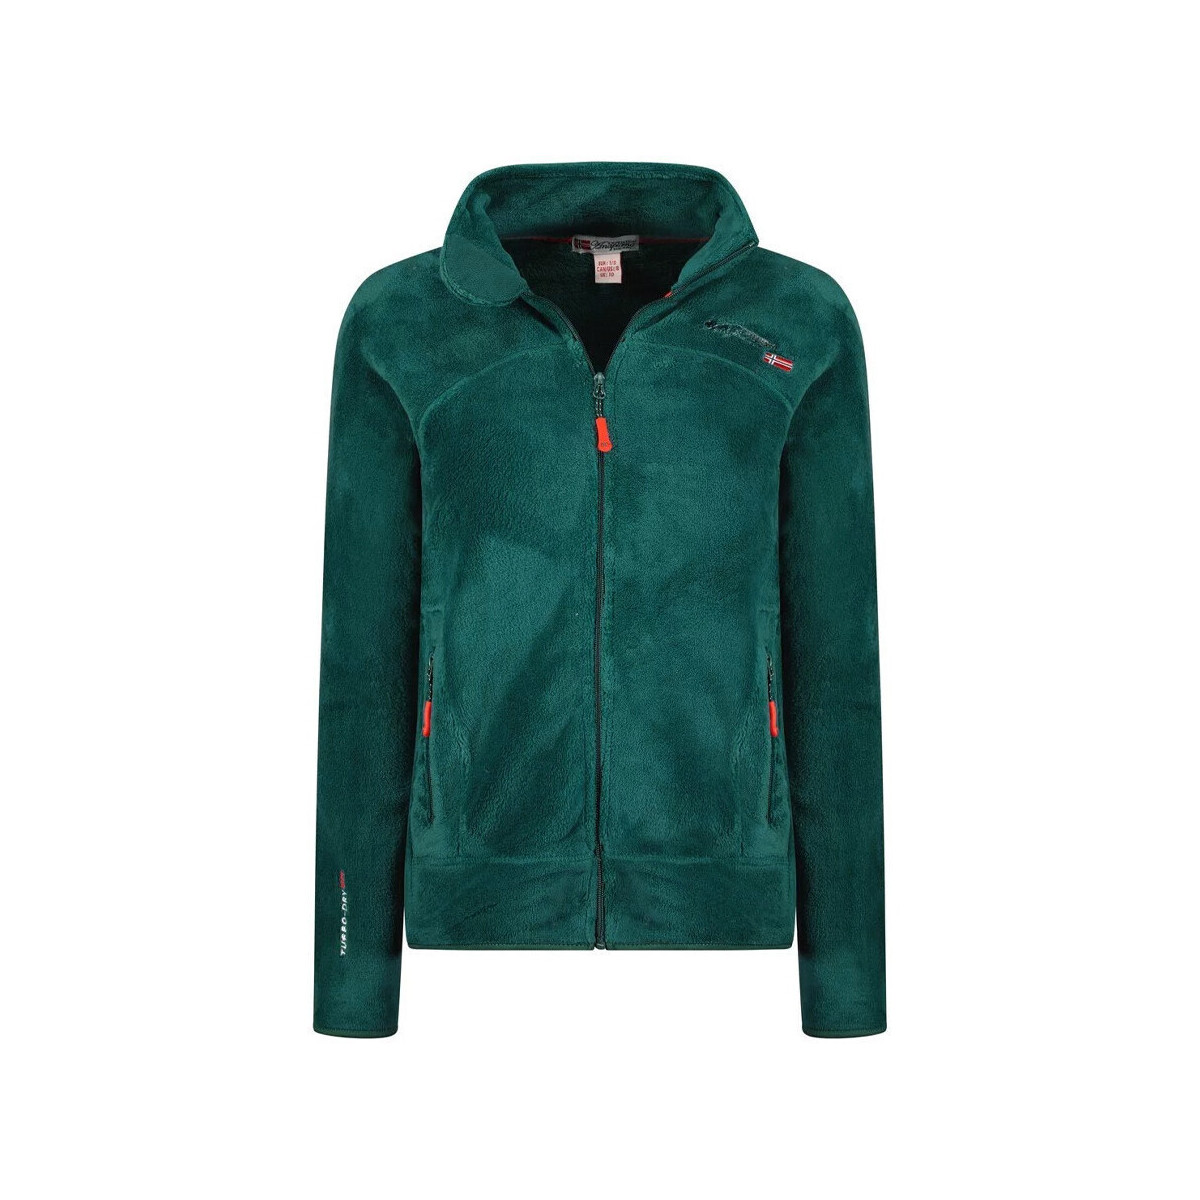 Vêtements Femme Polaires Geographical Norway WR624F/GN Vert